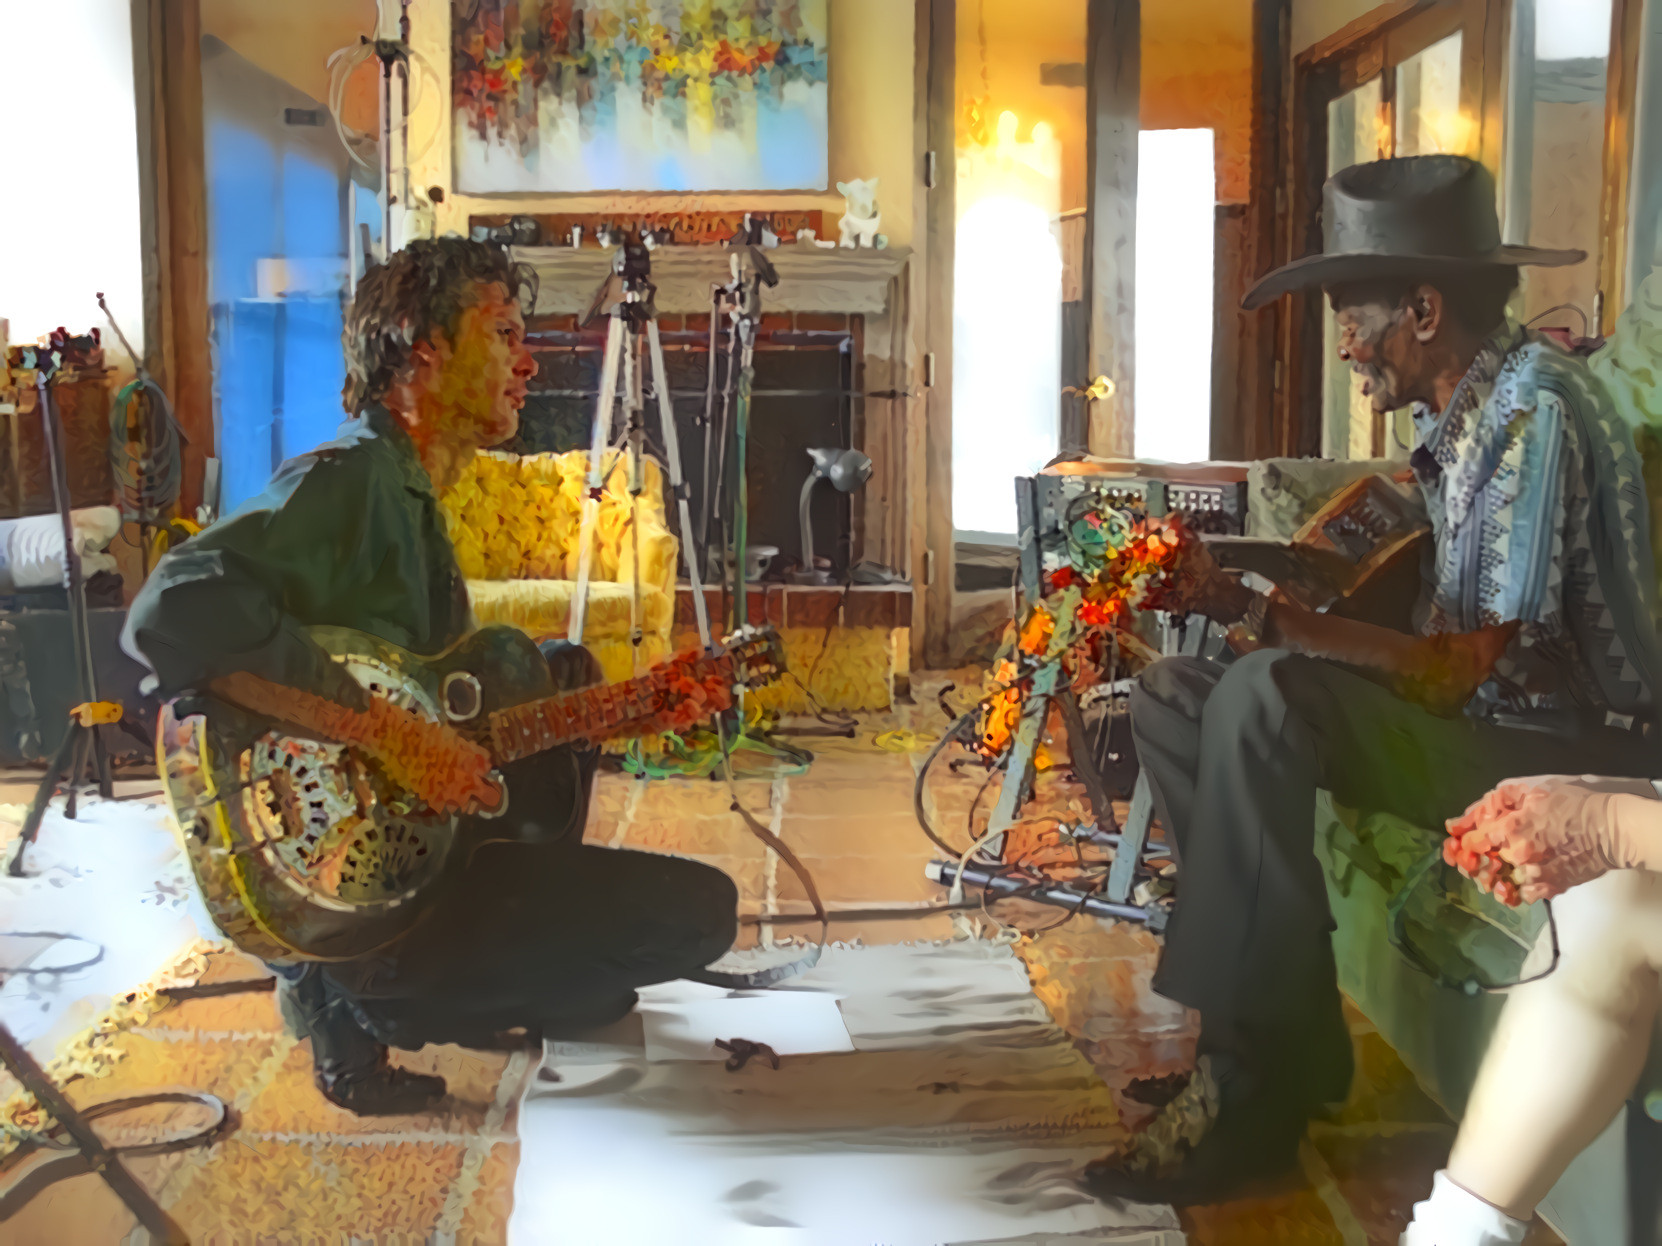 Charlie Sexton with Clarence “Gatemouth” Brown, Los Super 7 sessions, Austin, TX - Photo: Rick Clark